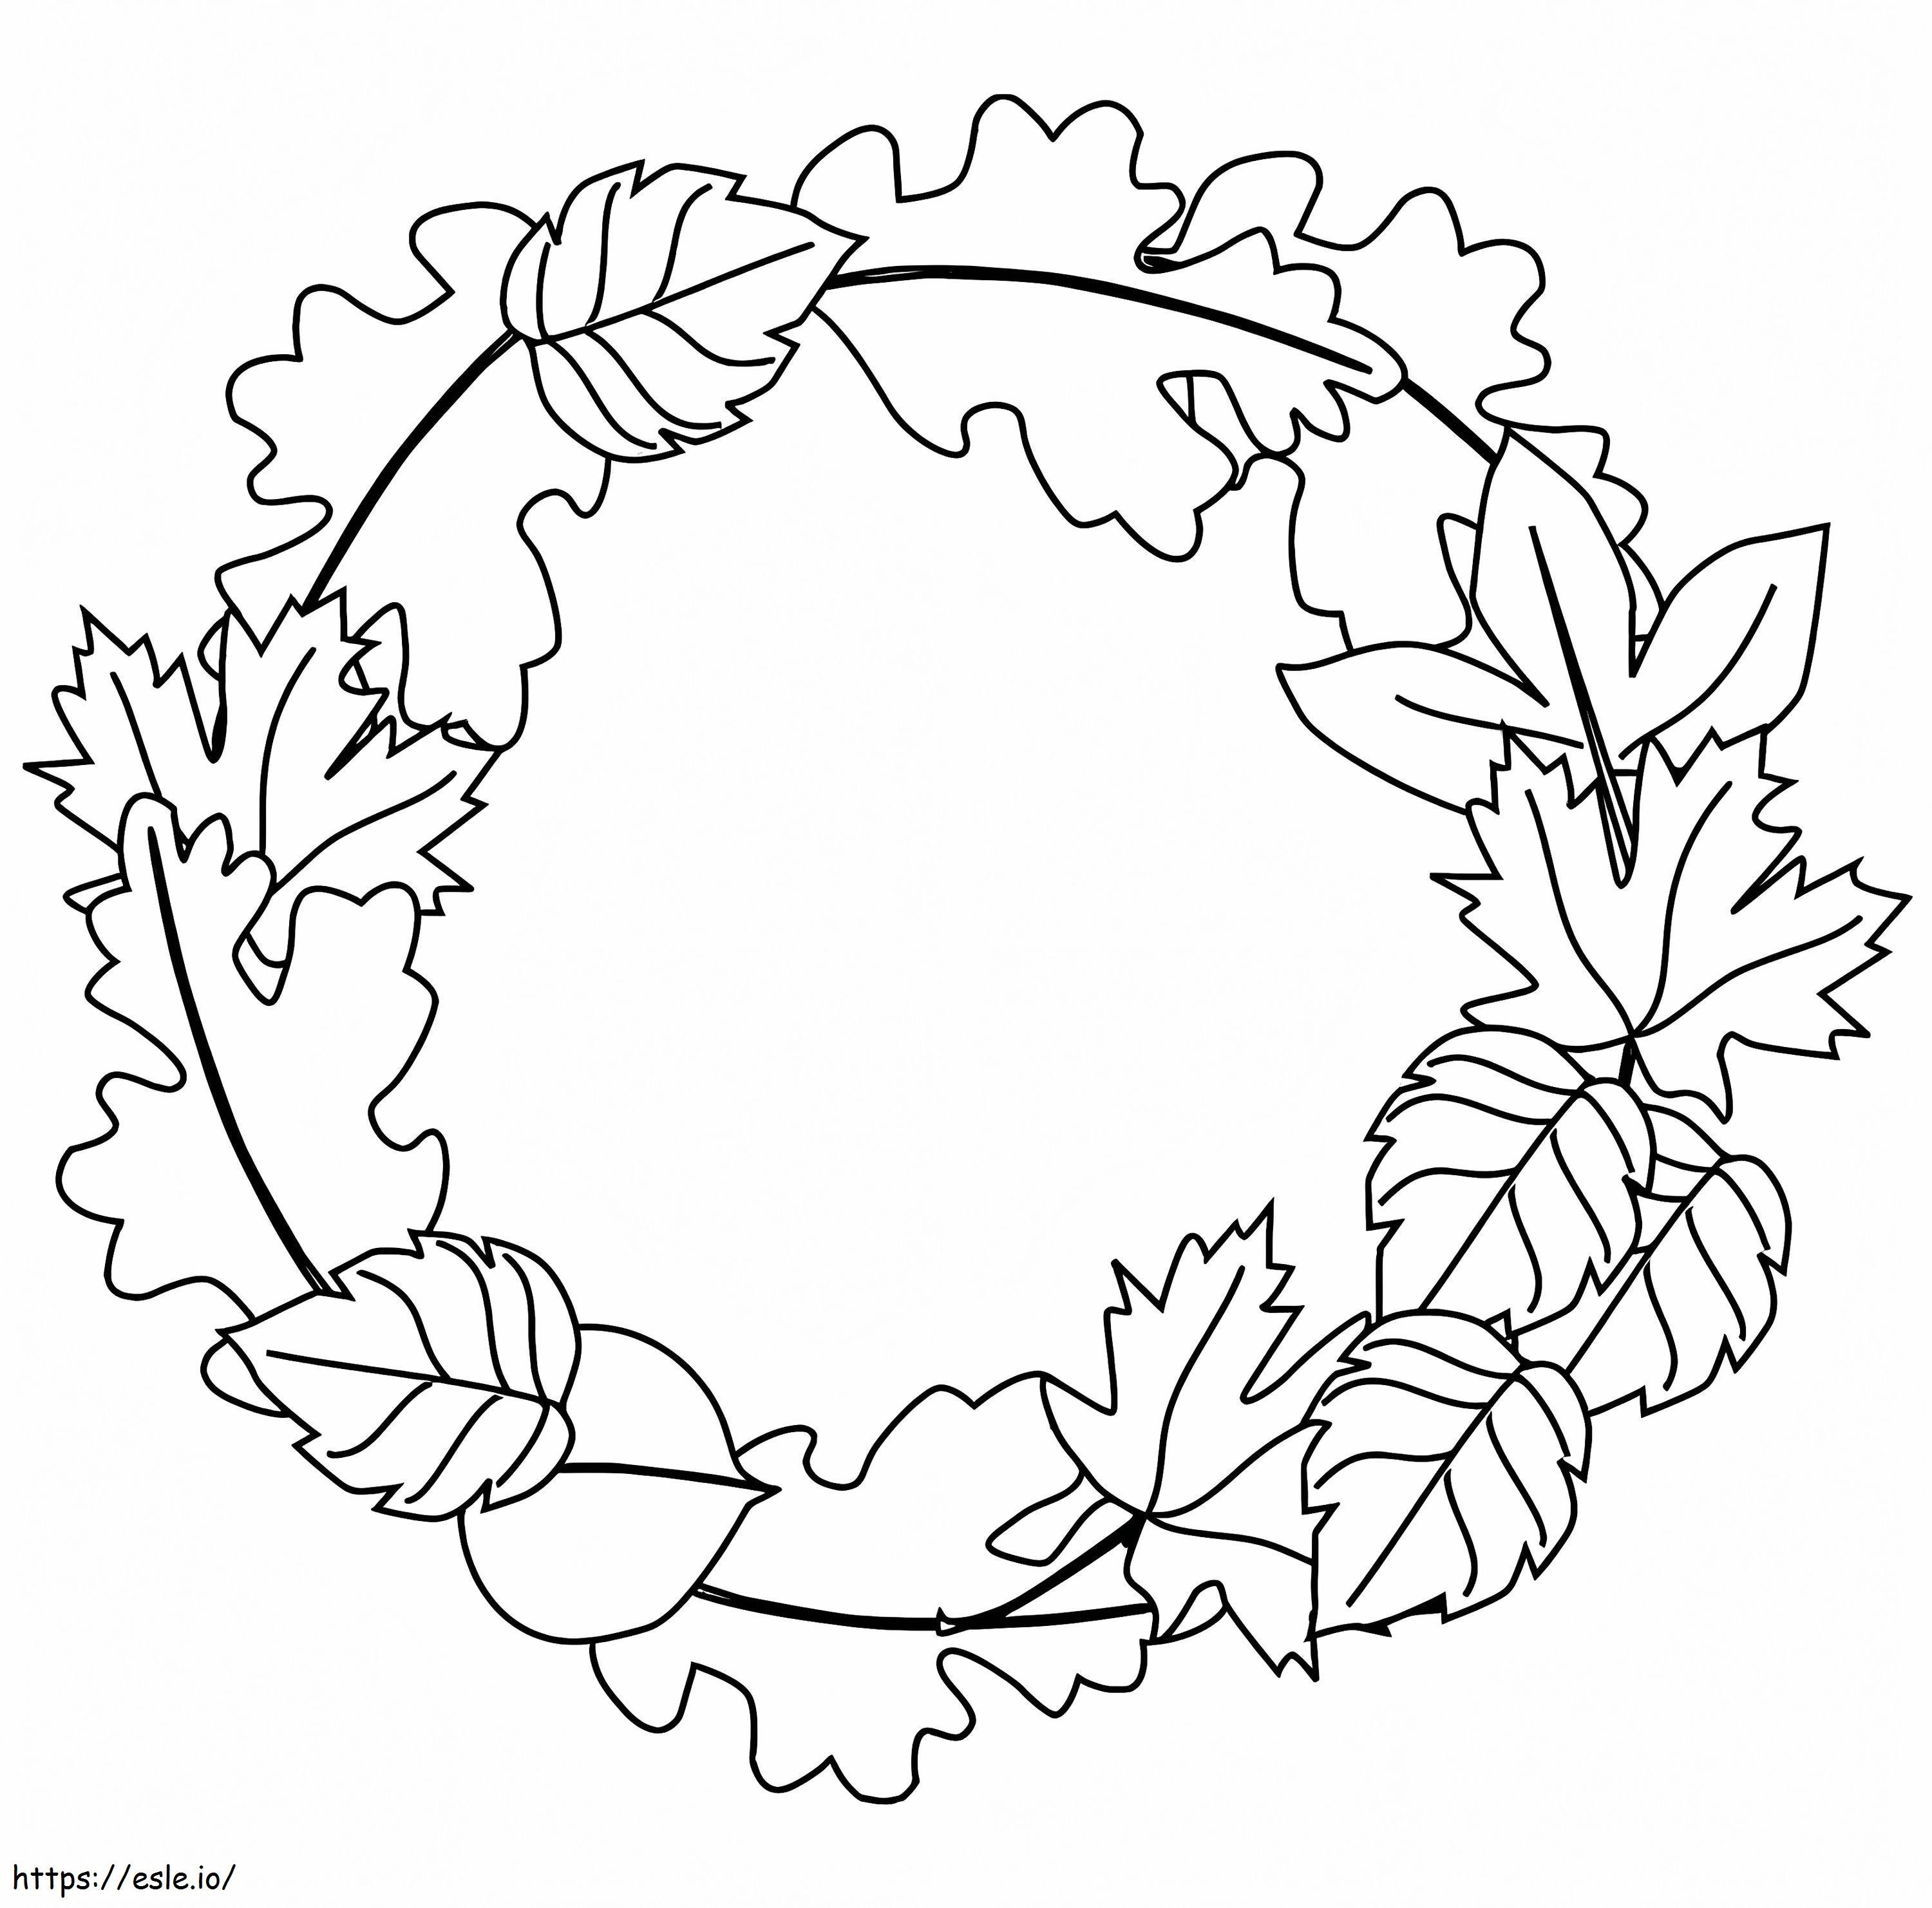 Fall Leaves 9 coloring page